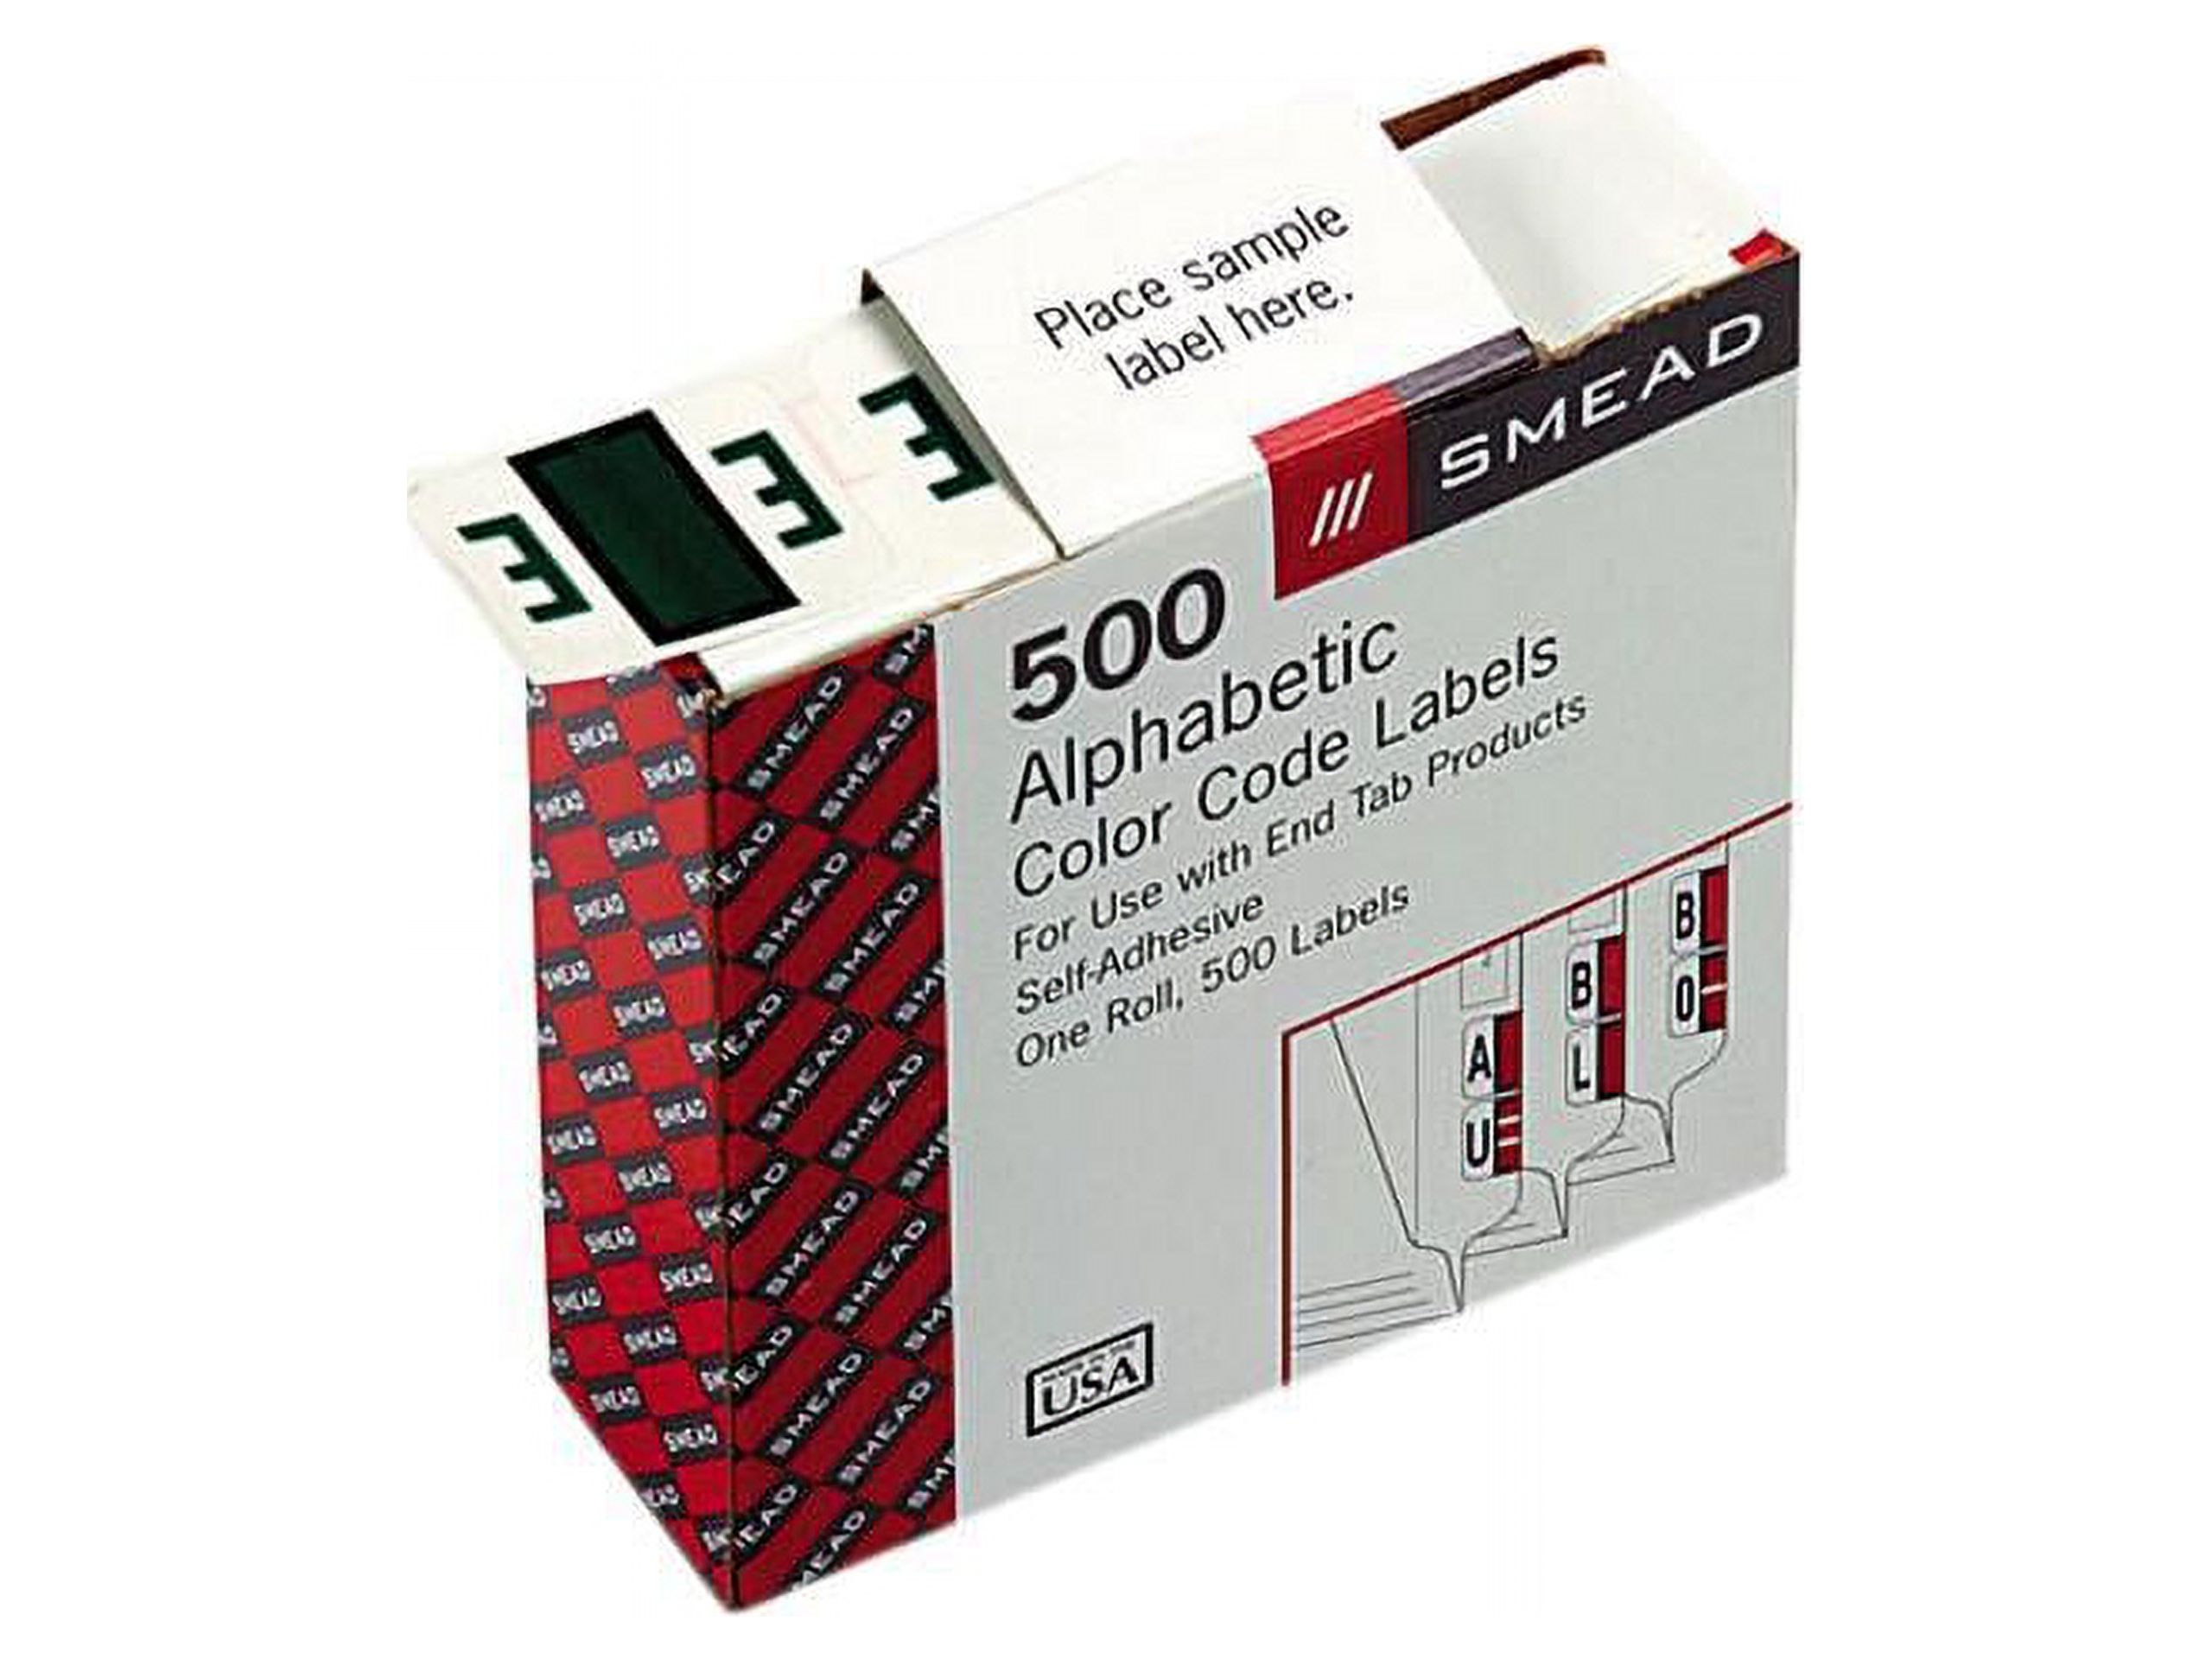 Smead 67075 A-Z Color-Coded Bar-Style End Tab Labels, Letter E, Dark Green, 500/Roll - image 1 of 3